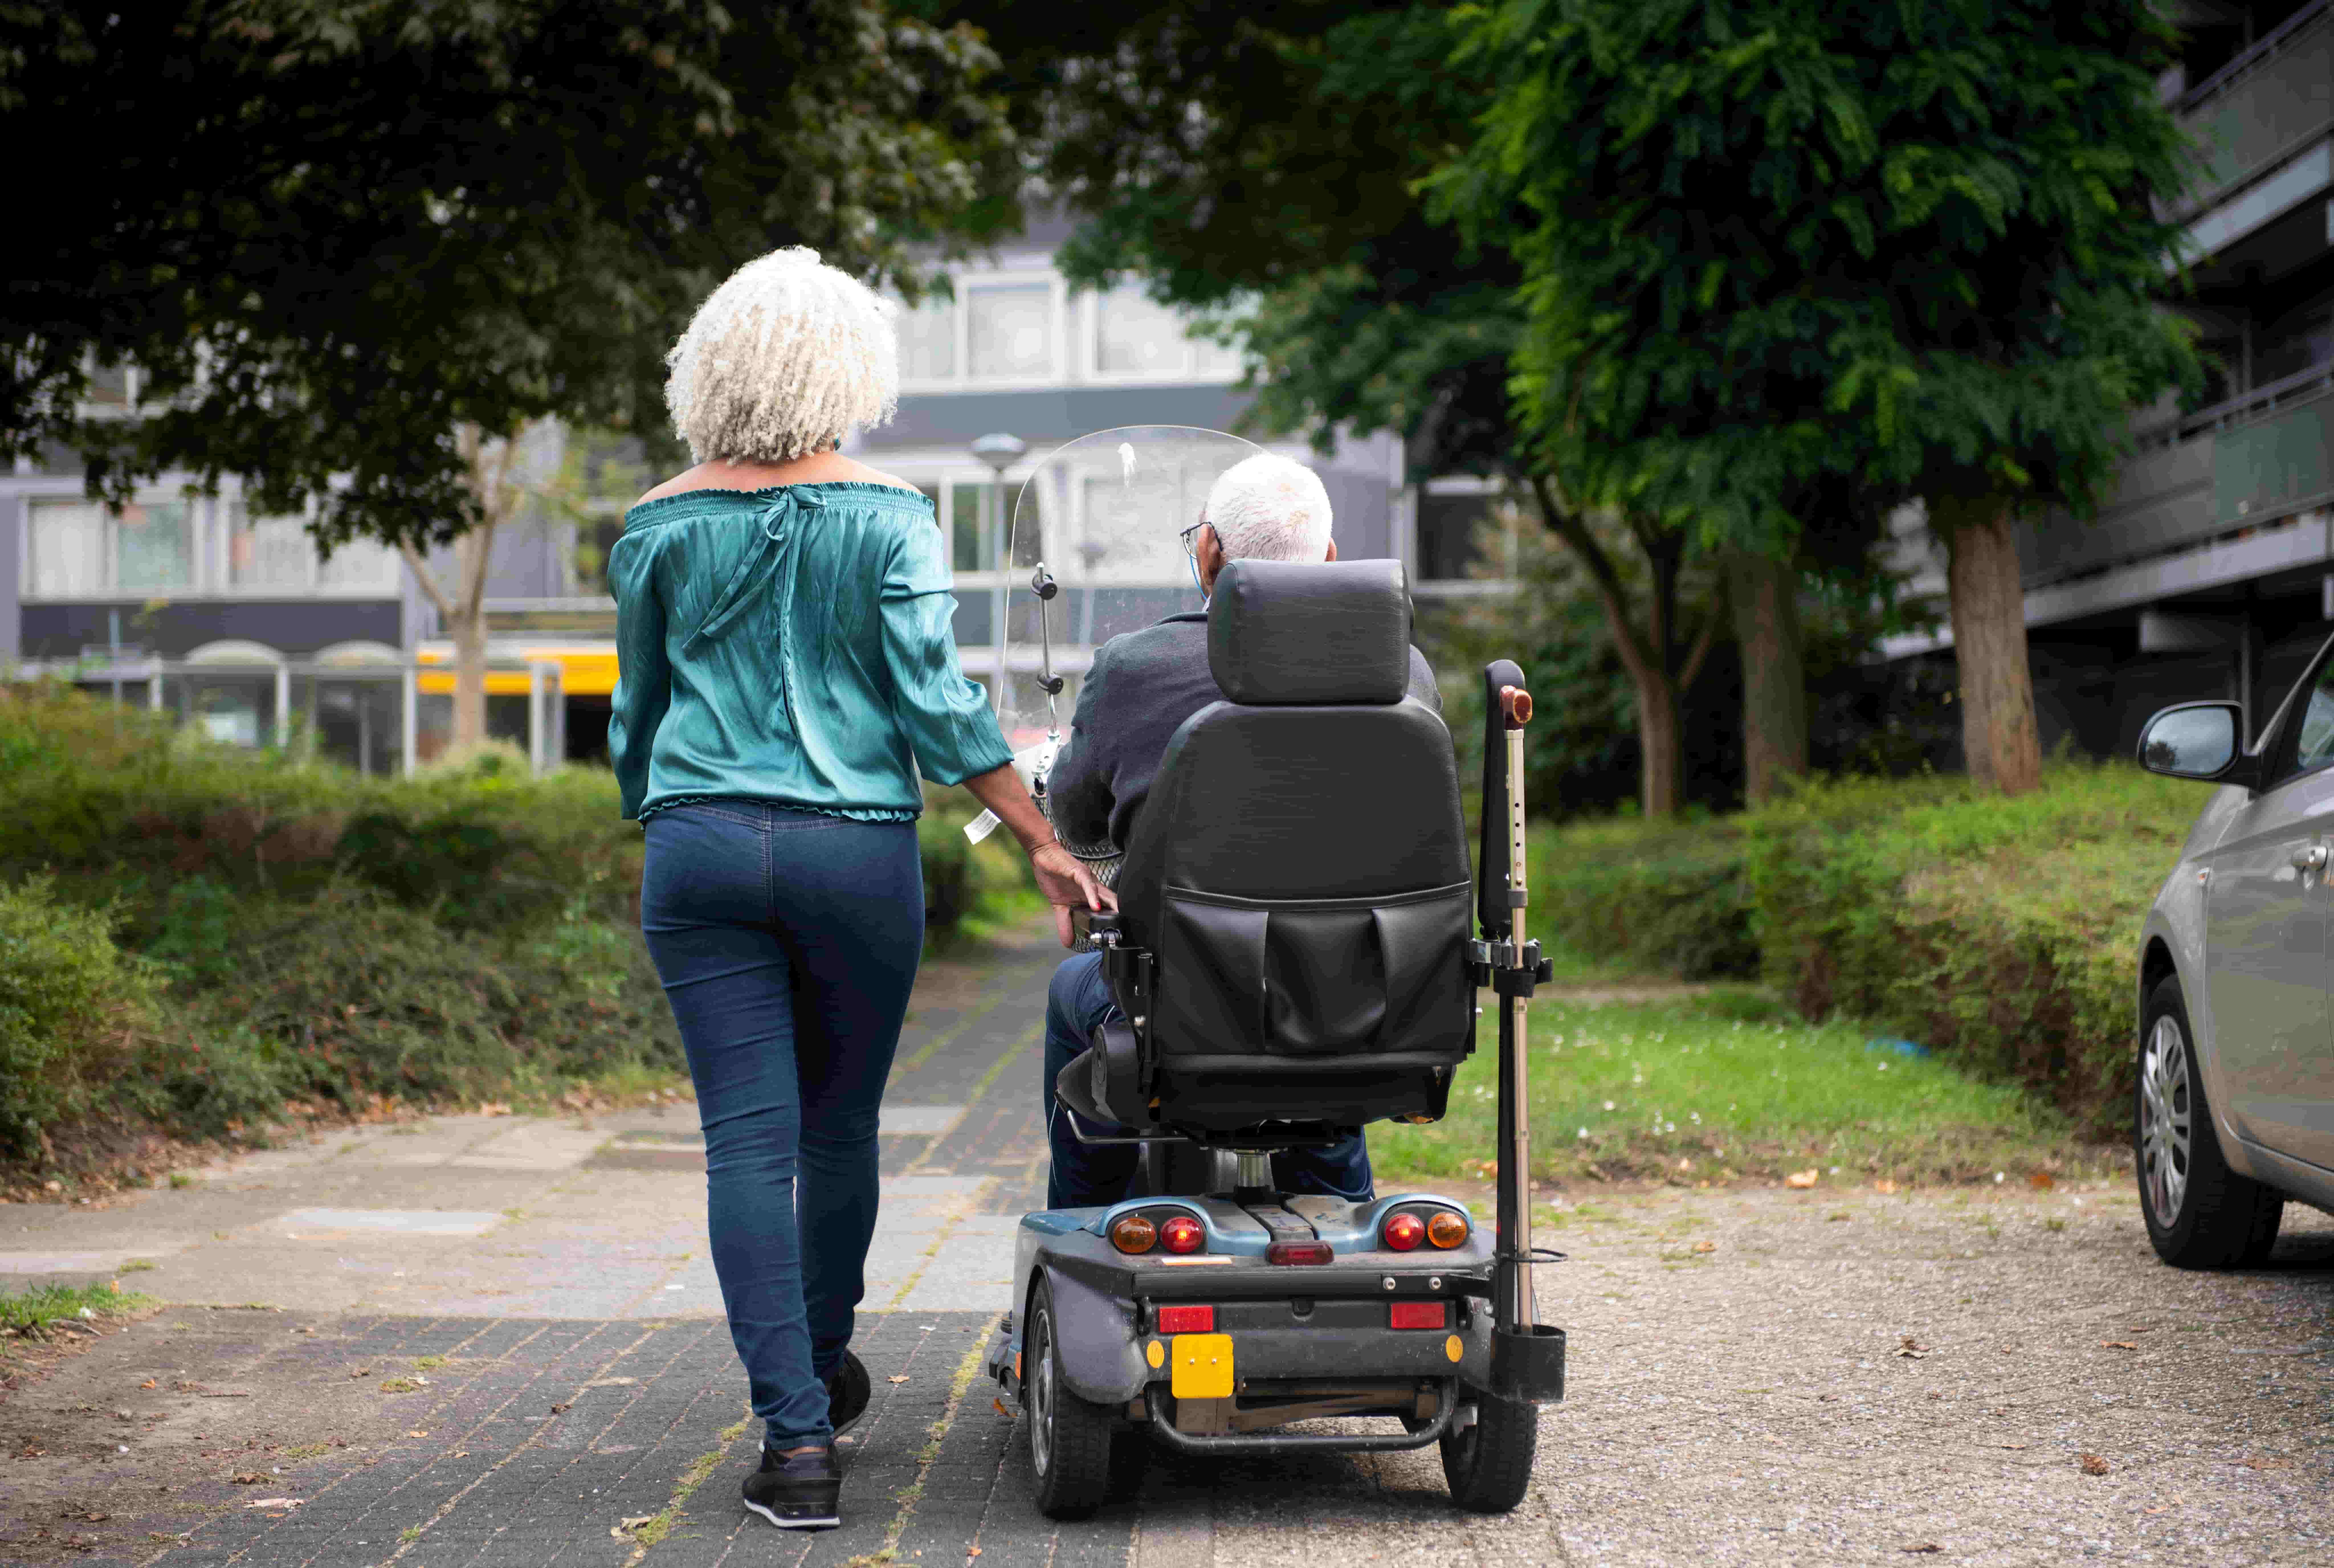 Two people next to each other, one in an electric wheelchair